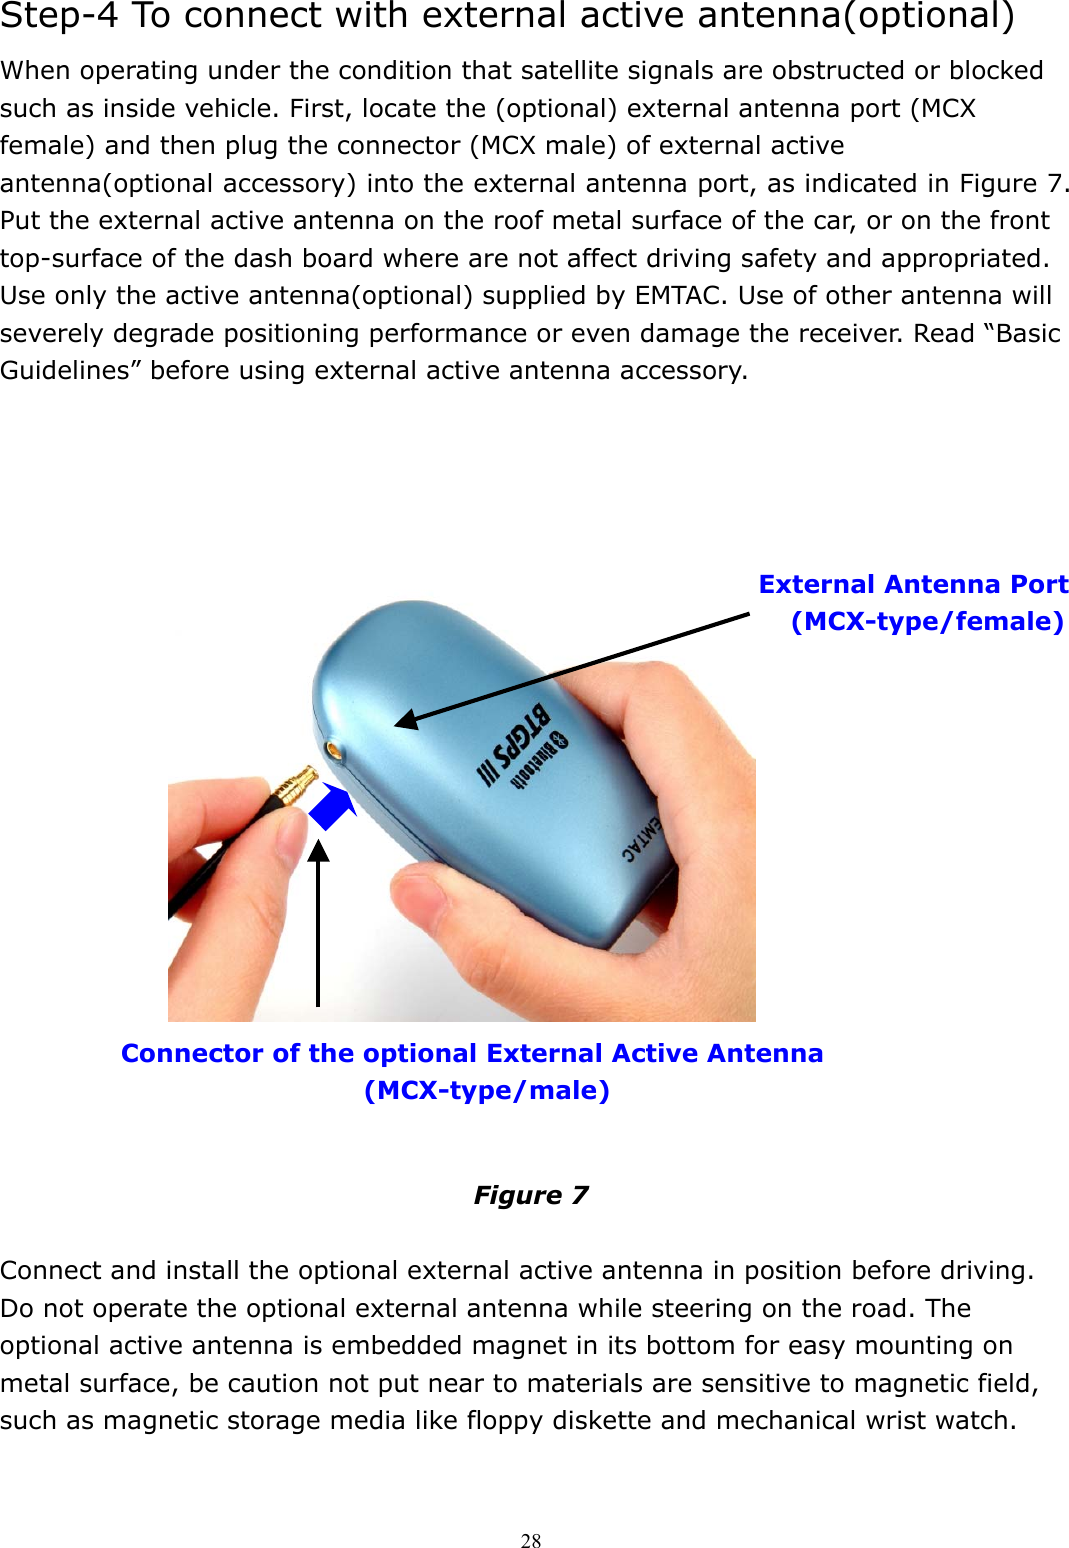  28Step-4 To connect with external active antenna(optional) When operating under the condition that satellite signals are obstructed or blocked such as inside vehicle. First, locate the (optional) external antenna port (MCX female) and then plug the connector (MCX male) of external active antenna(optional accessory) into the external antenna port, as indicated in Figure 7. Put the external active antenna on the roof metal surface of the car, or on the front top-surface of the dash board where are not affect driving safety and appropriated. Use only the active antenna(optional) supplied by EMTAC. Use of other antenna will severely degrade positioning performance or even damage the receiver. Read “Basic Guidelines” before using external active antenna accessory.                      Figure 7  Connect and install the optional external active antenna in position before driving. Do not operate the optional external antenna while steering on the road. The optional active antenna is embedded magnet in its bottom for easy mounting on metal surface, be caution not put near to materials are sensitive to magnetic field, such as magnetic storage media like floppy diskette and mechanical wrist watch.   External Antenna Port (MCX-type/female)  Connector of the optional External Active Antenna   (MCX-type/male) 